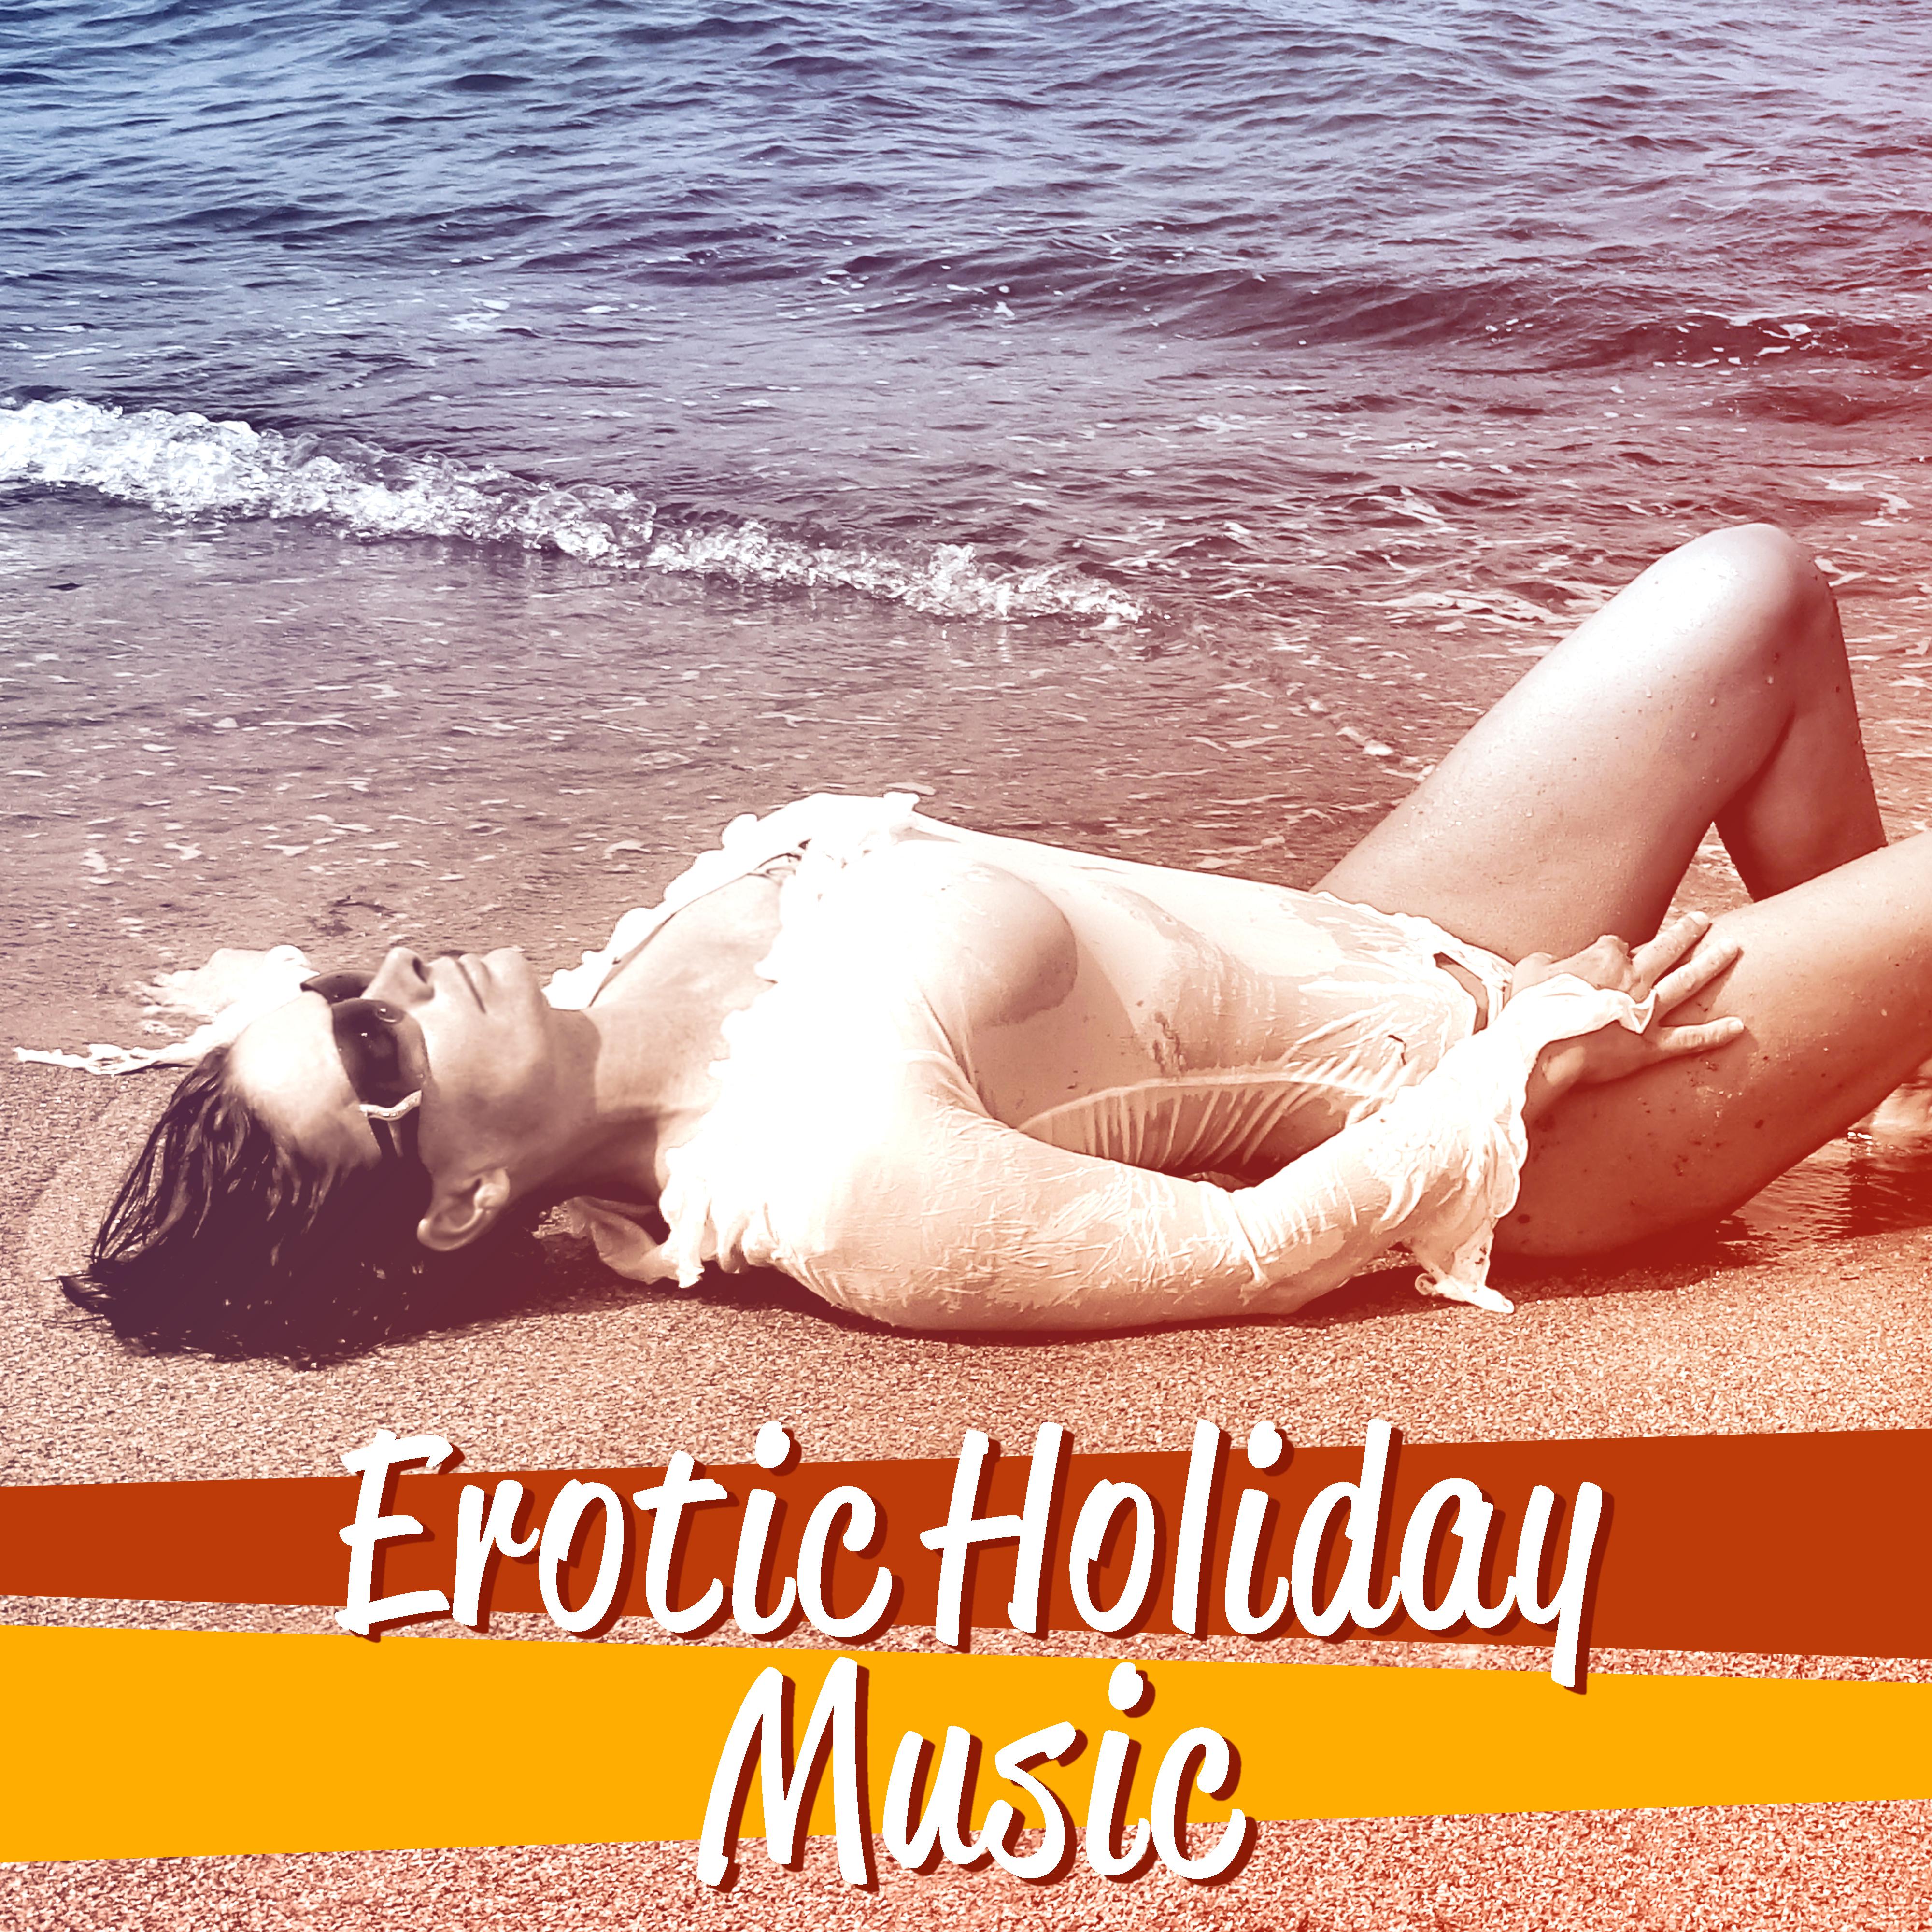 Erotic Holiday Music – Sensual Dance, Party Night, Summer Love, Erotic Lounge, Sensuality, Deep Relaxation, Summer Chill